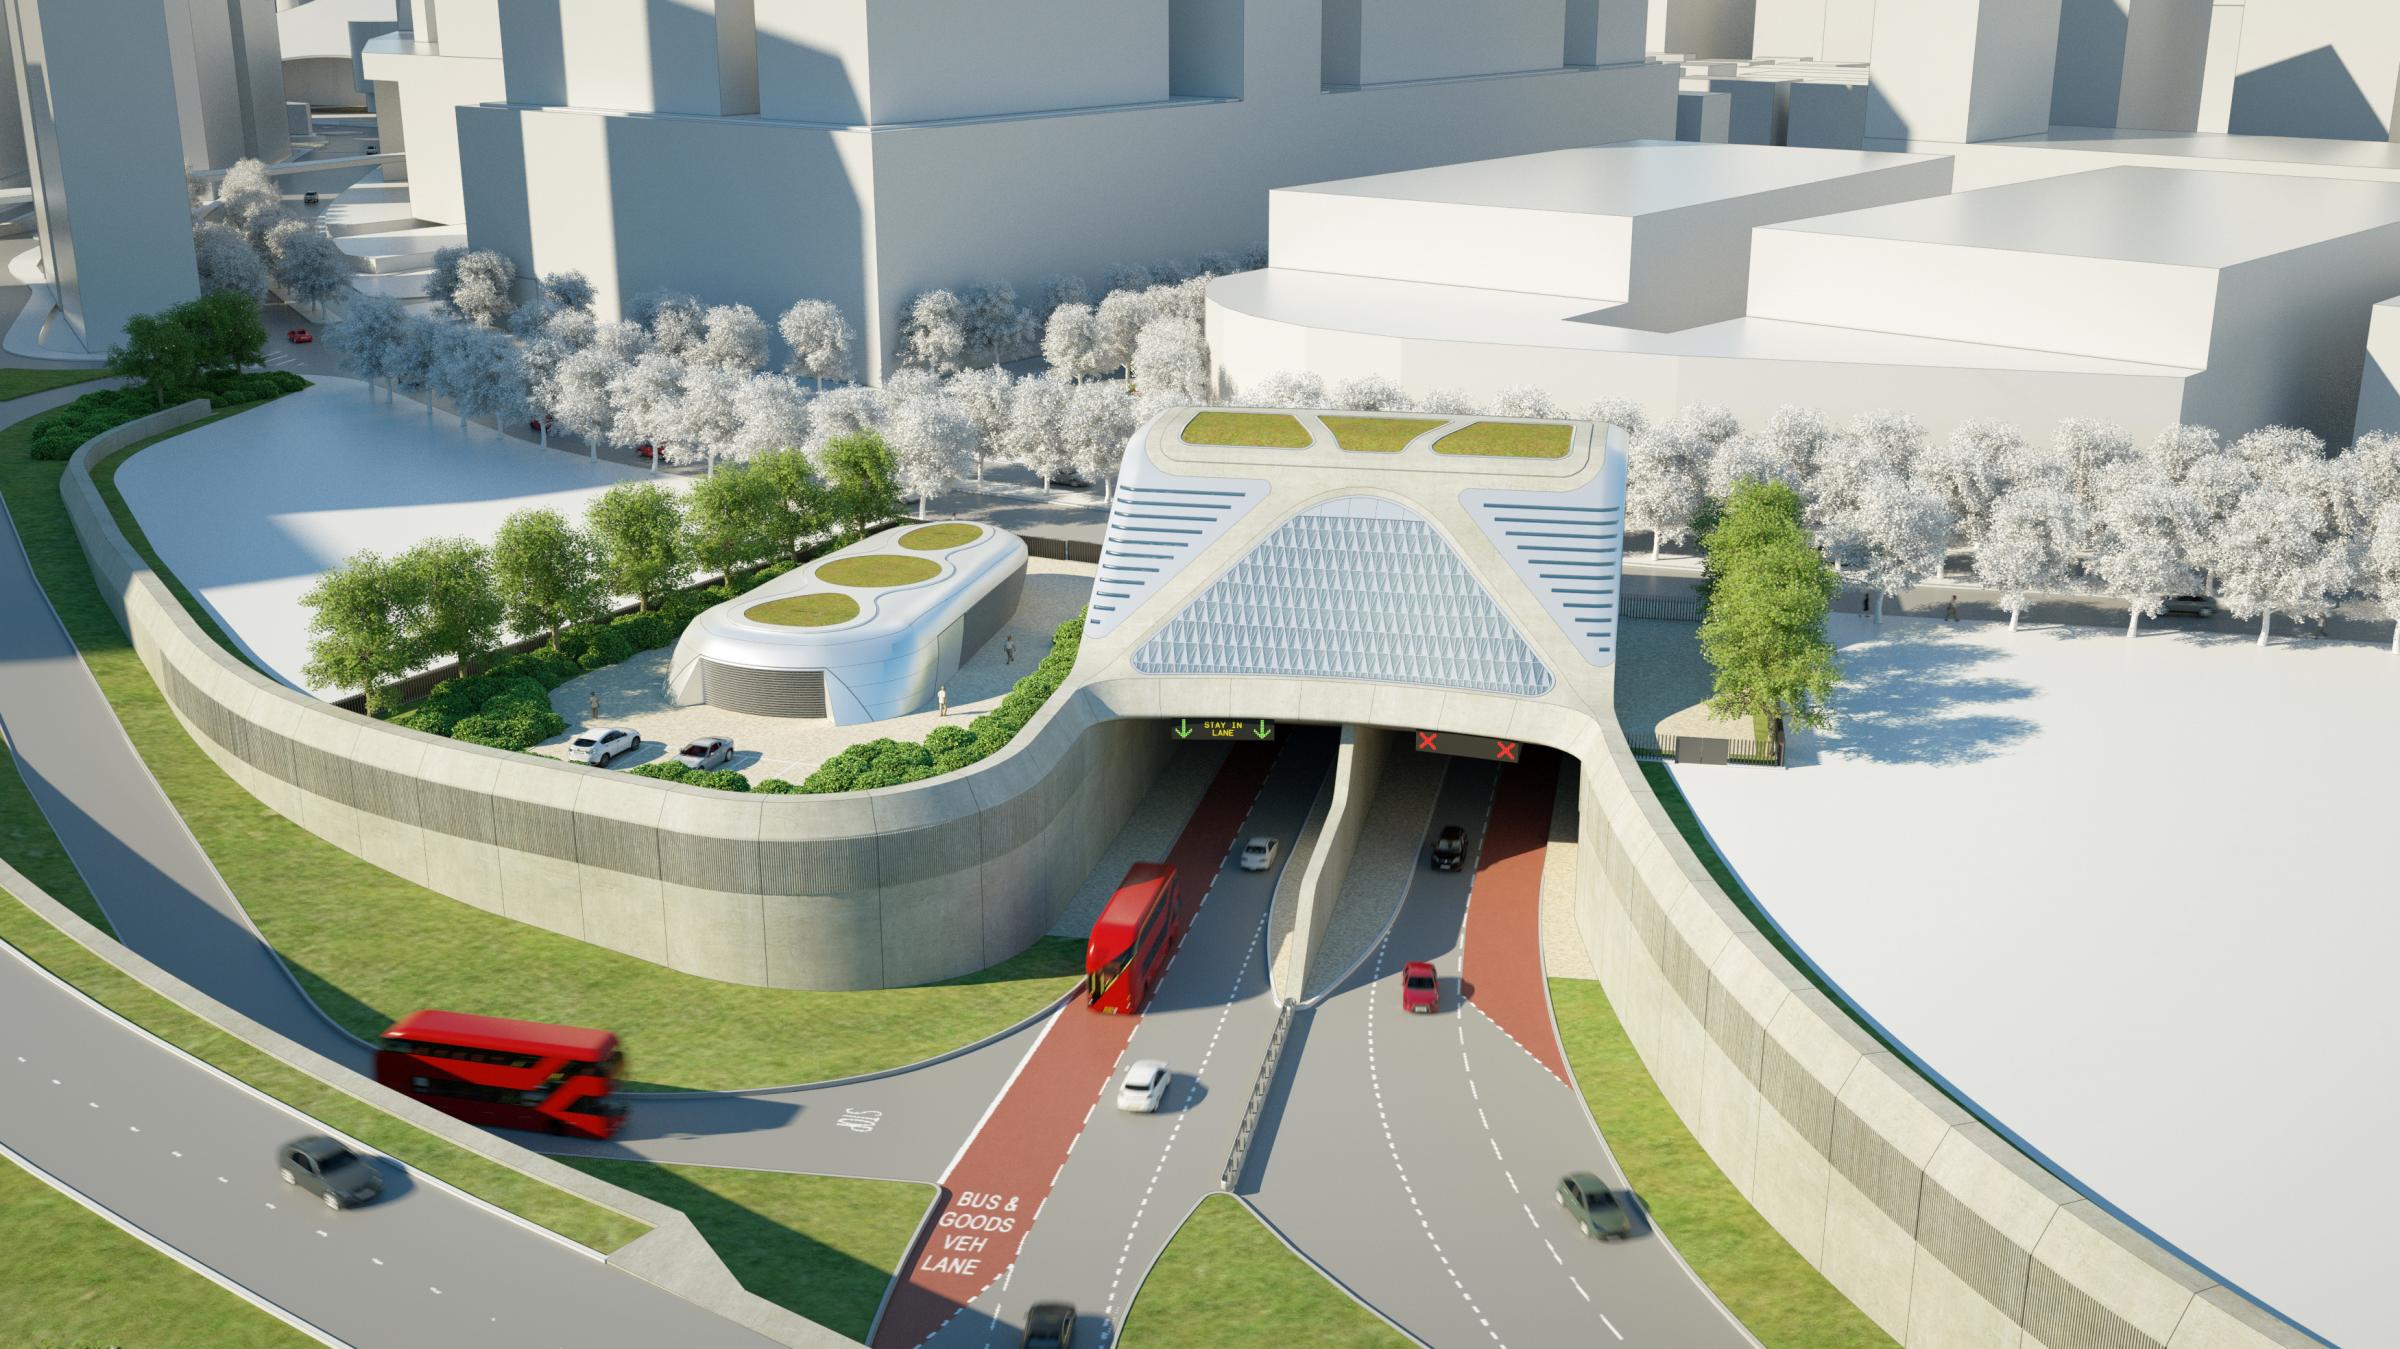 TfL claims Silvertown Tunnel will relieve congestion, but protestors believe air pollution will get worse (Photo: TfL)